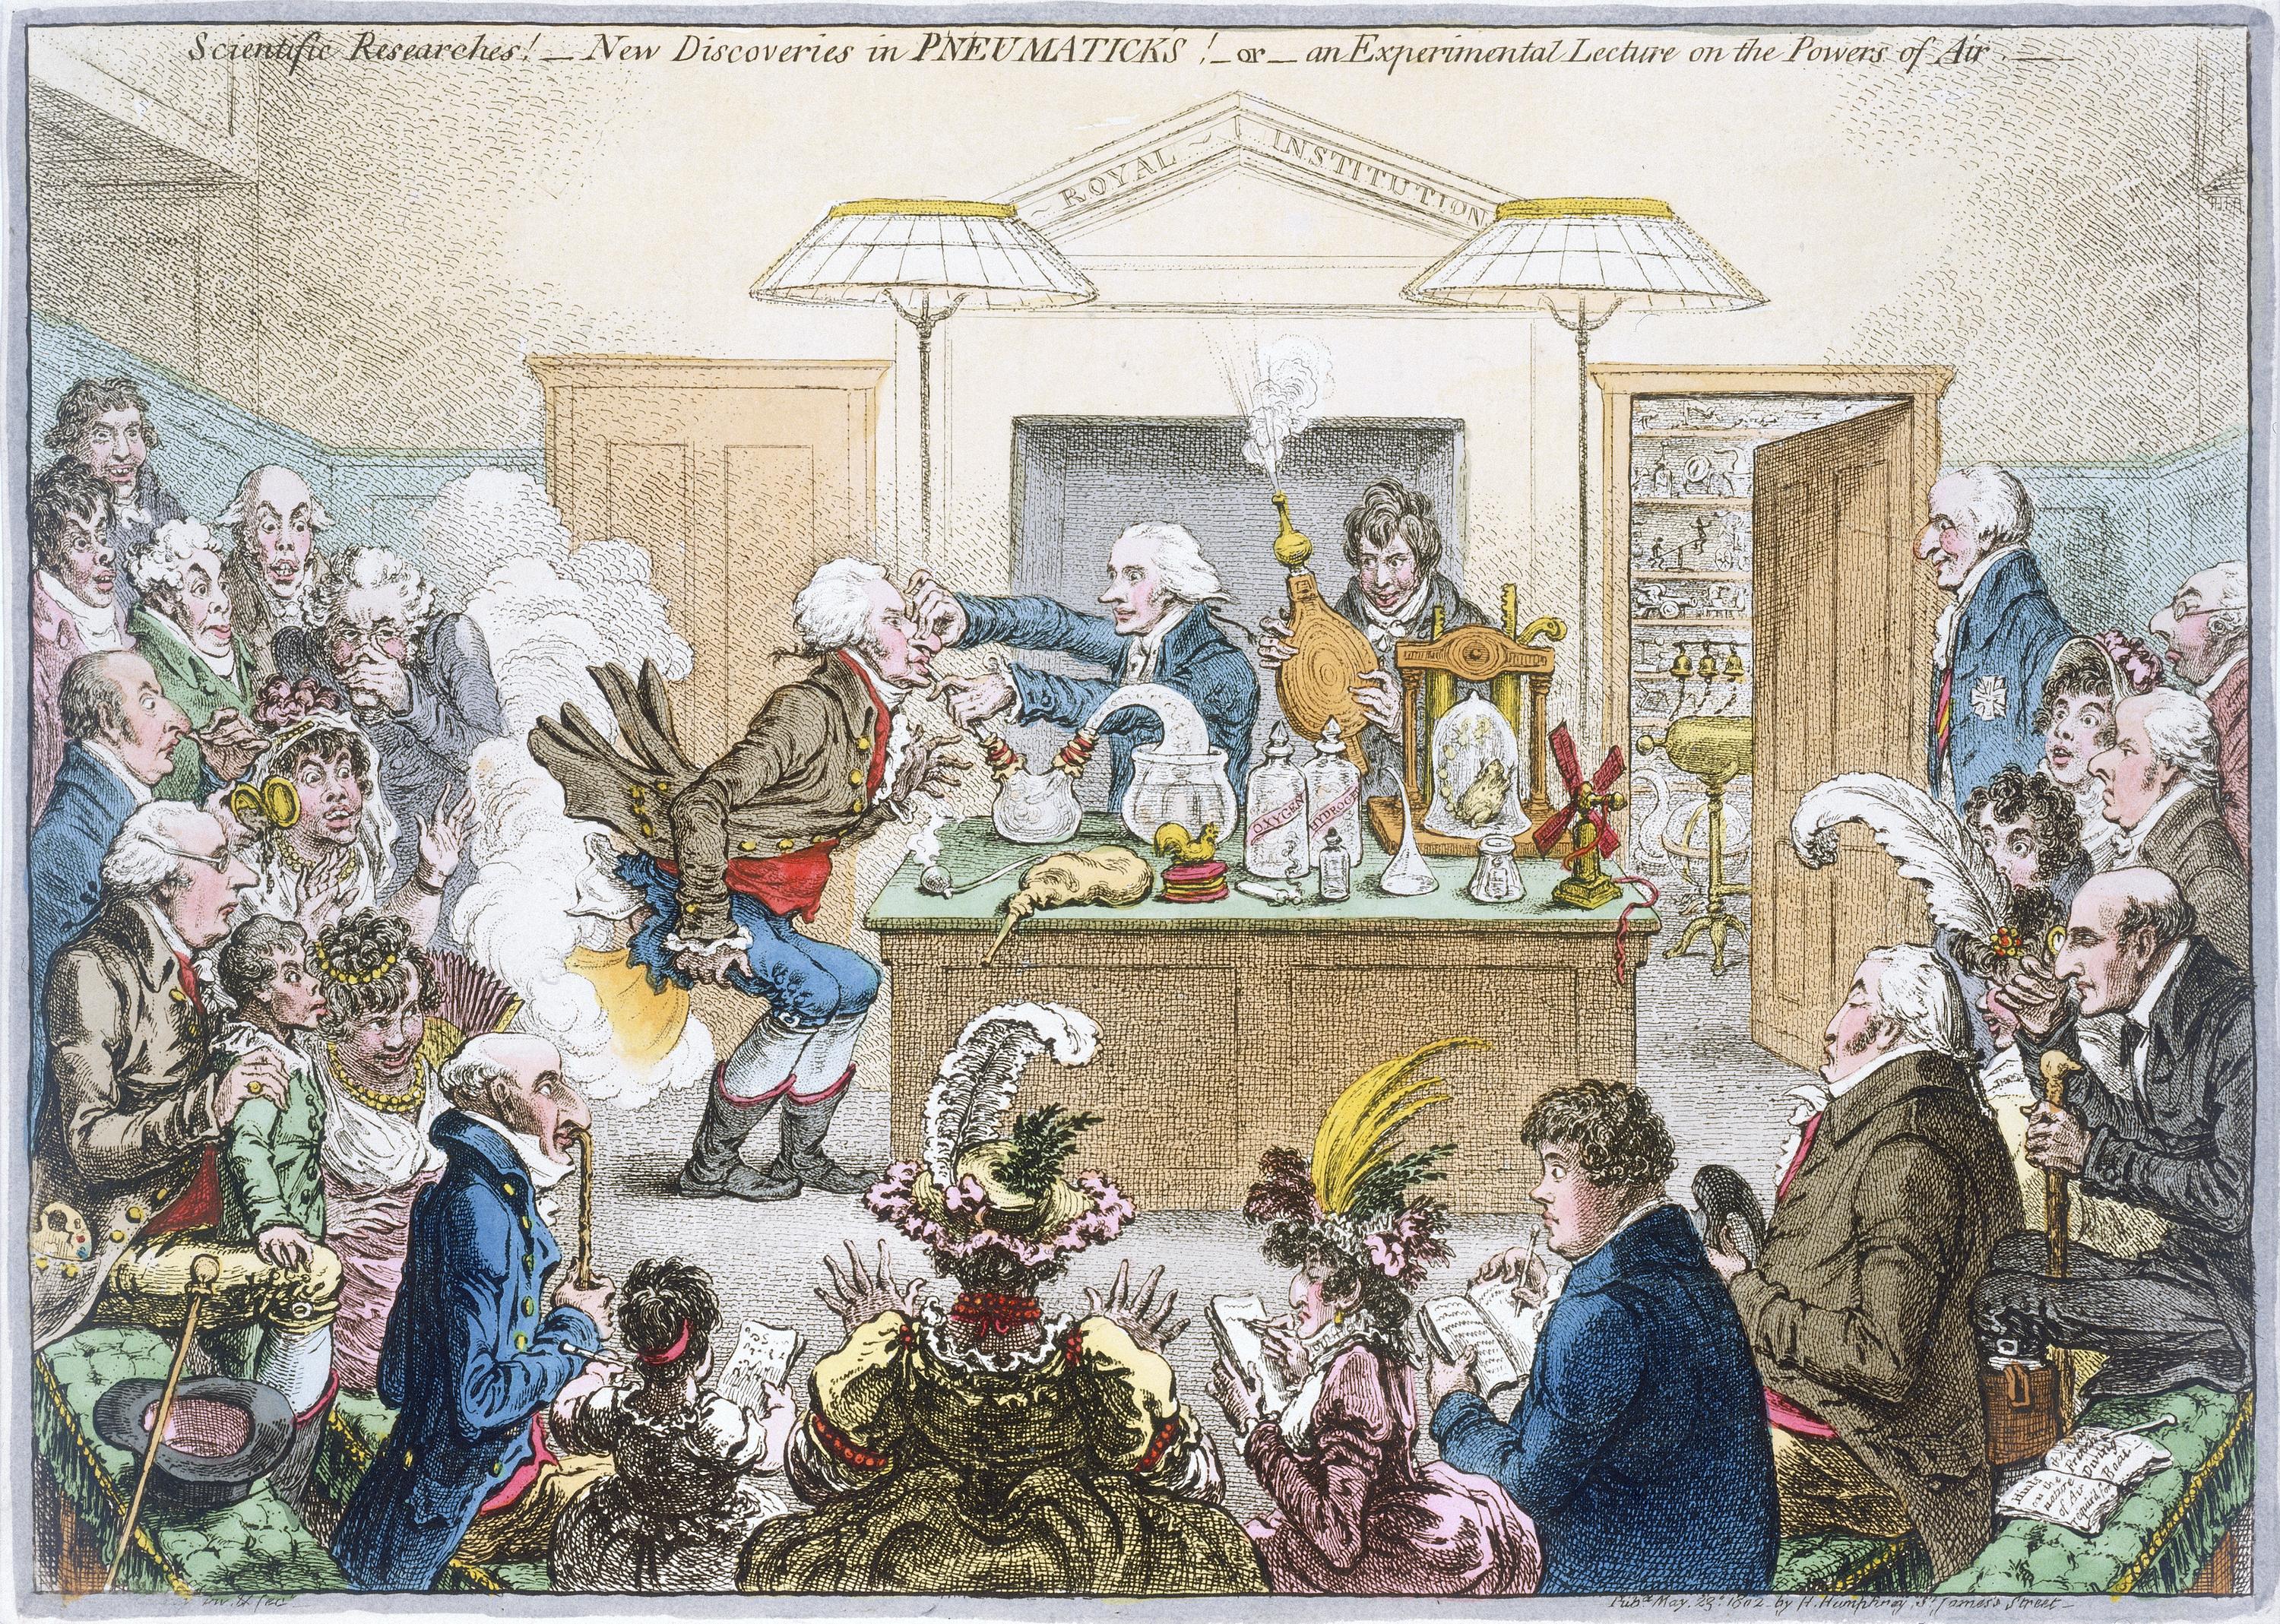 ‘Scientific Researches! - New Discoveries in Pneumaticks!’ by James Gilray, 1802, showing the chemist Humphry Davy (with bellows), who believed the Cornish sea-air had cured his illness when he visited his mother in Penzance in 1800